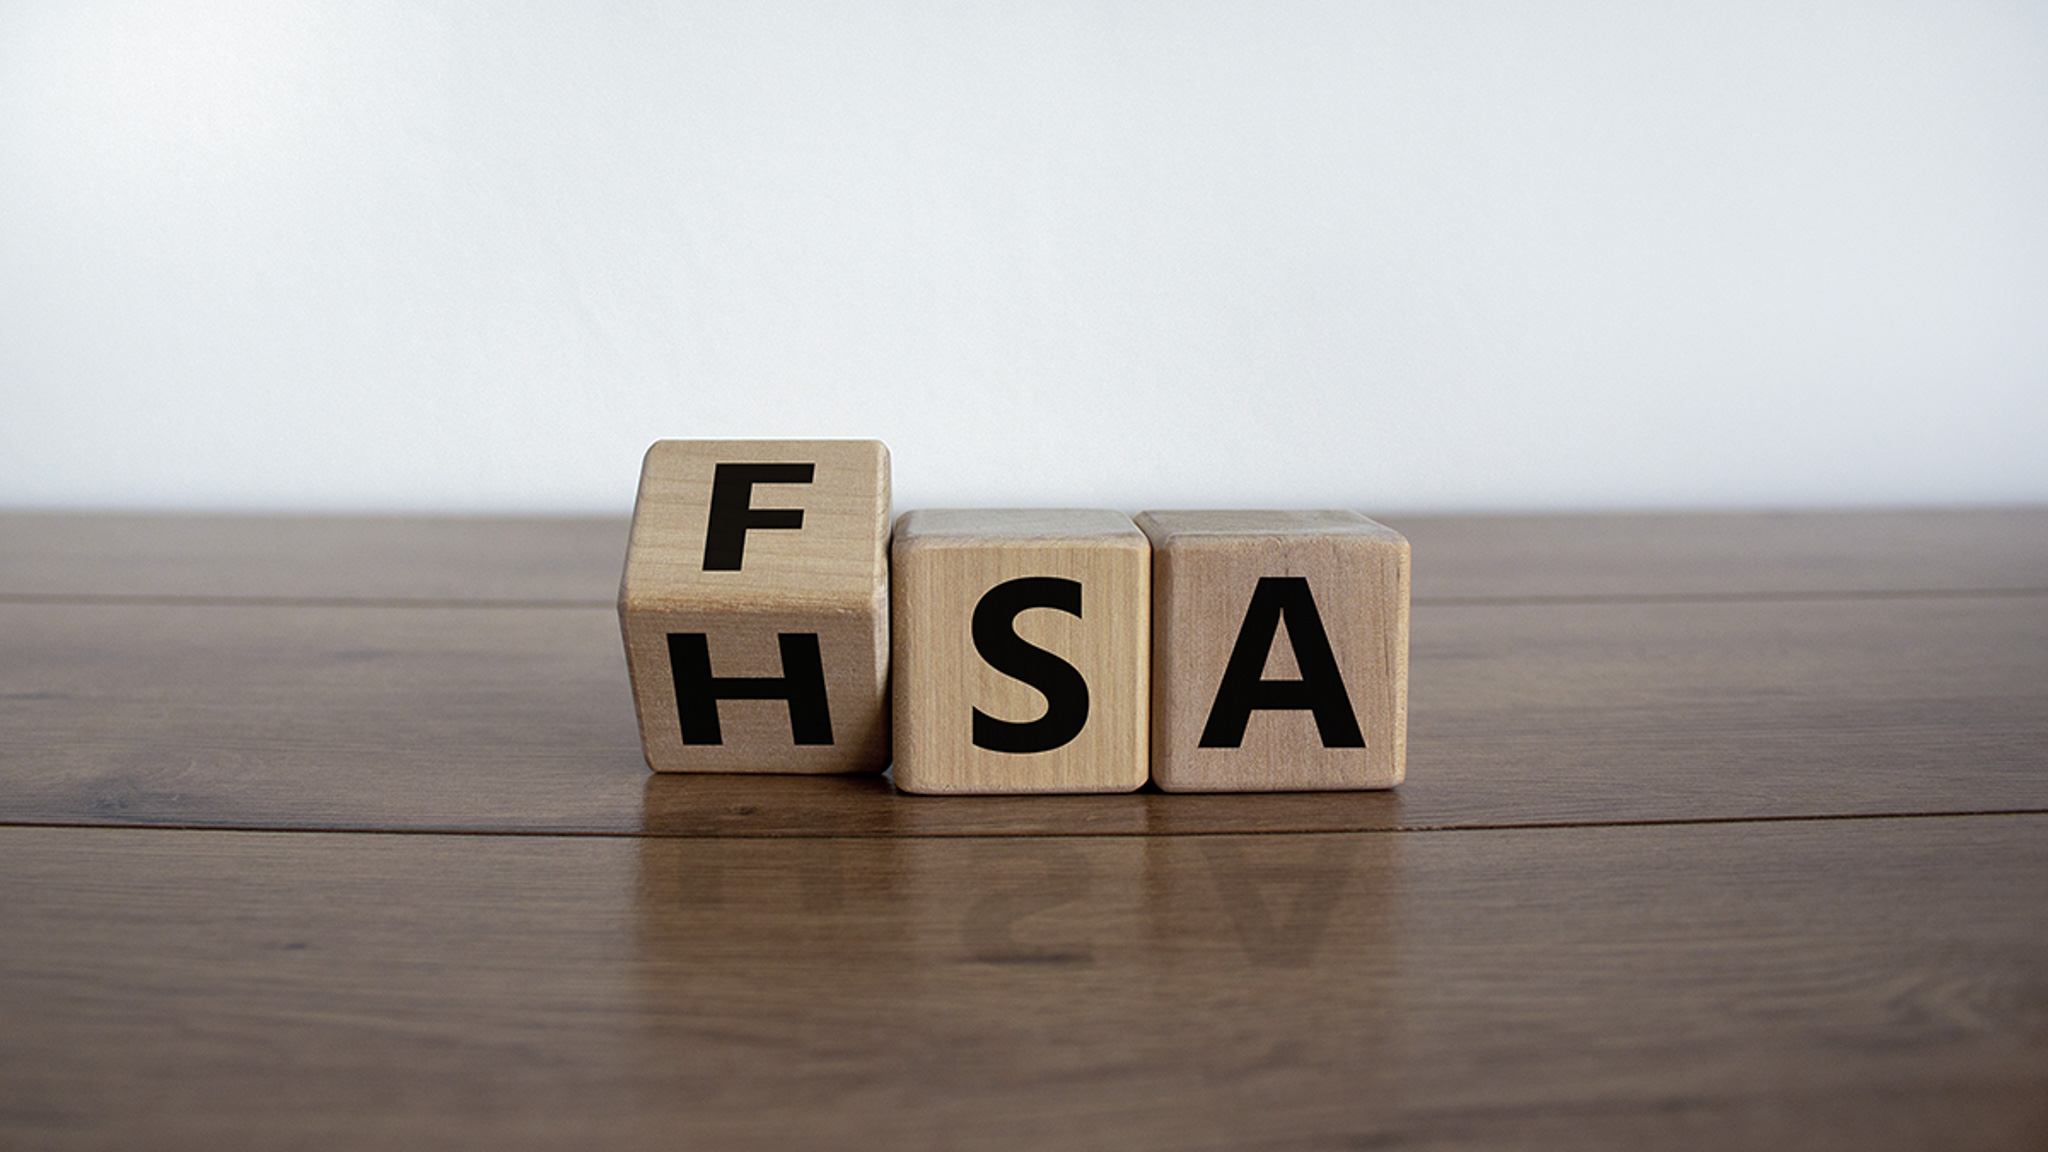 Here Are the Differences Between an HSA and FSA